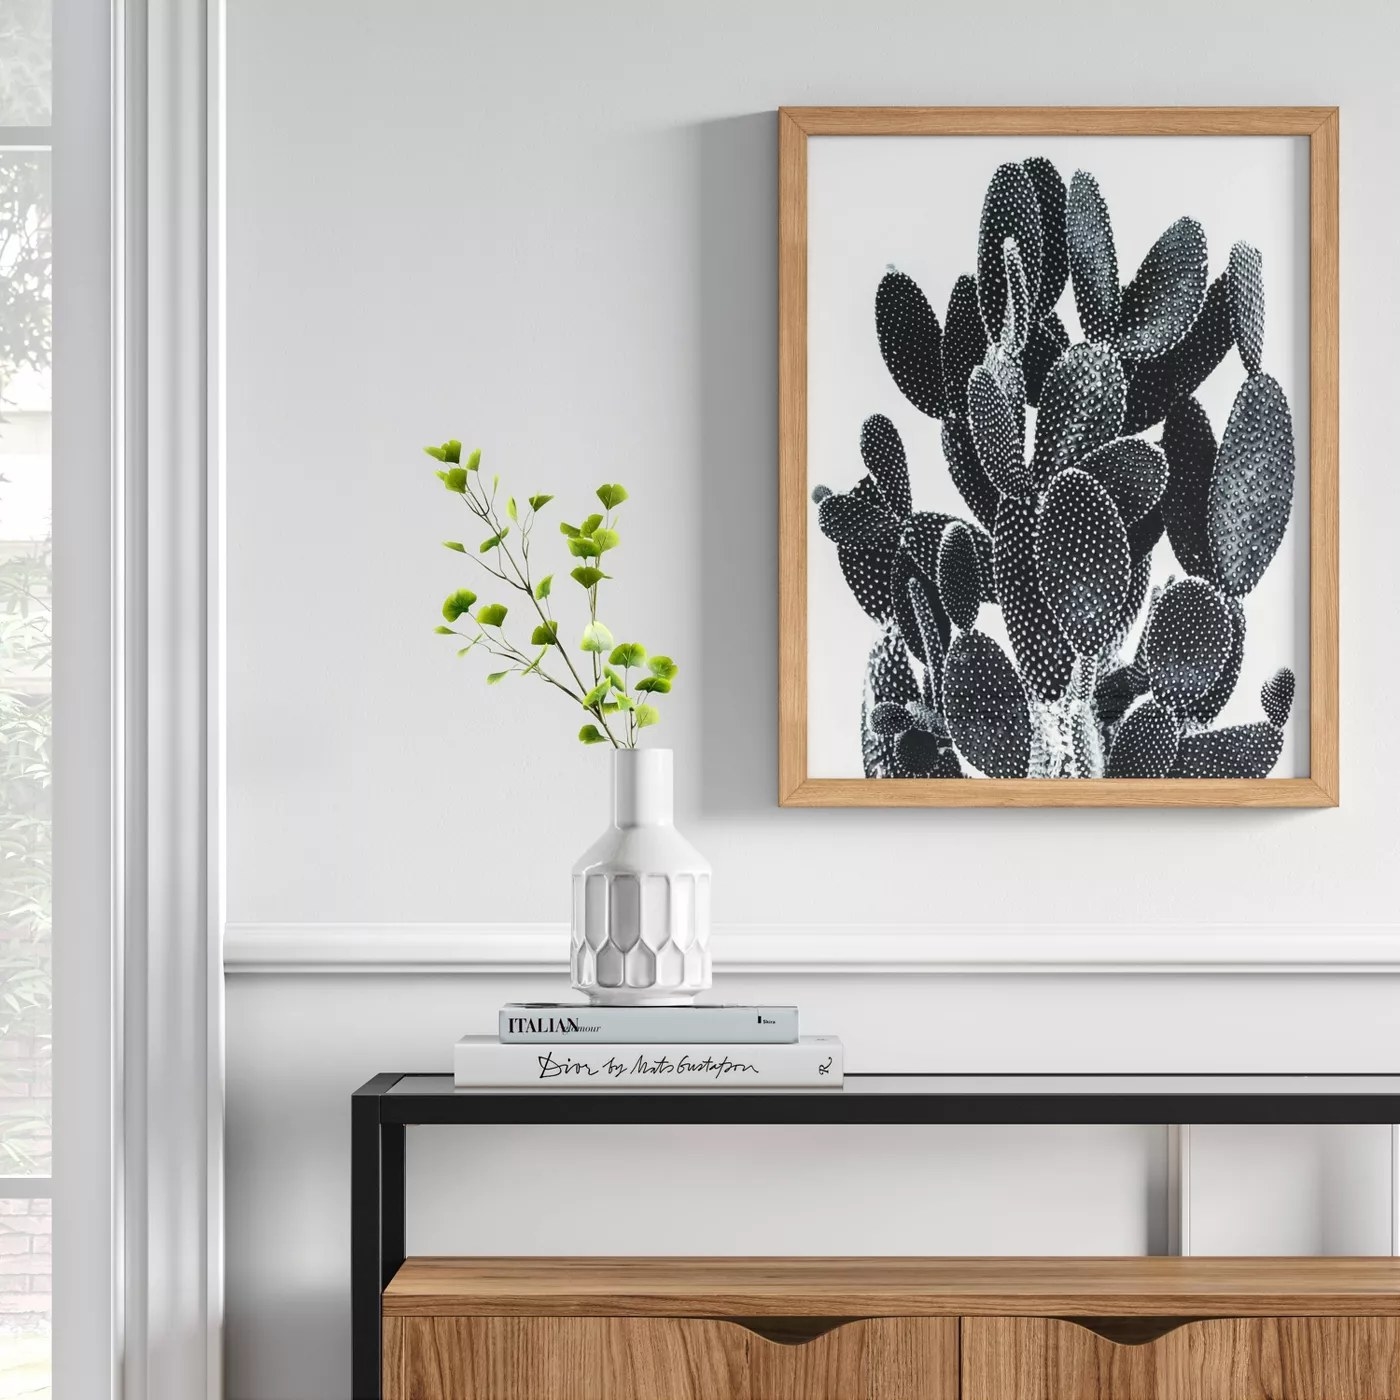 The black and white cactus print in a wood frame